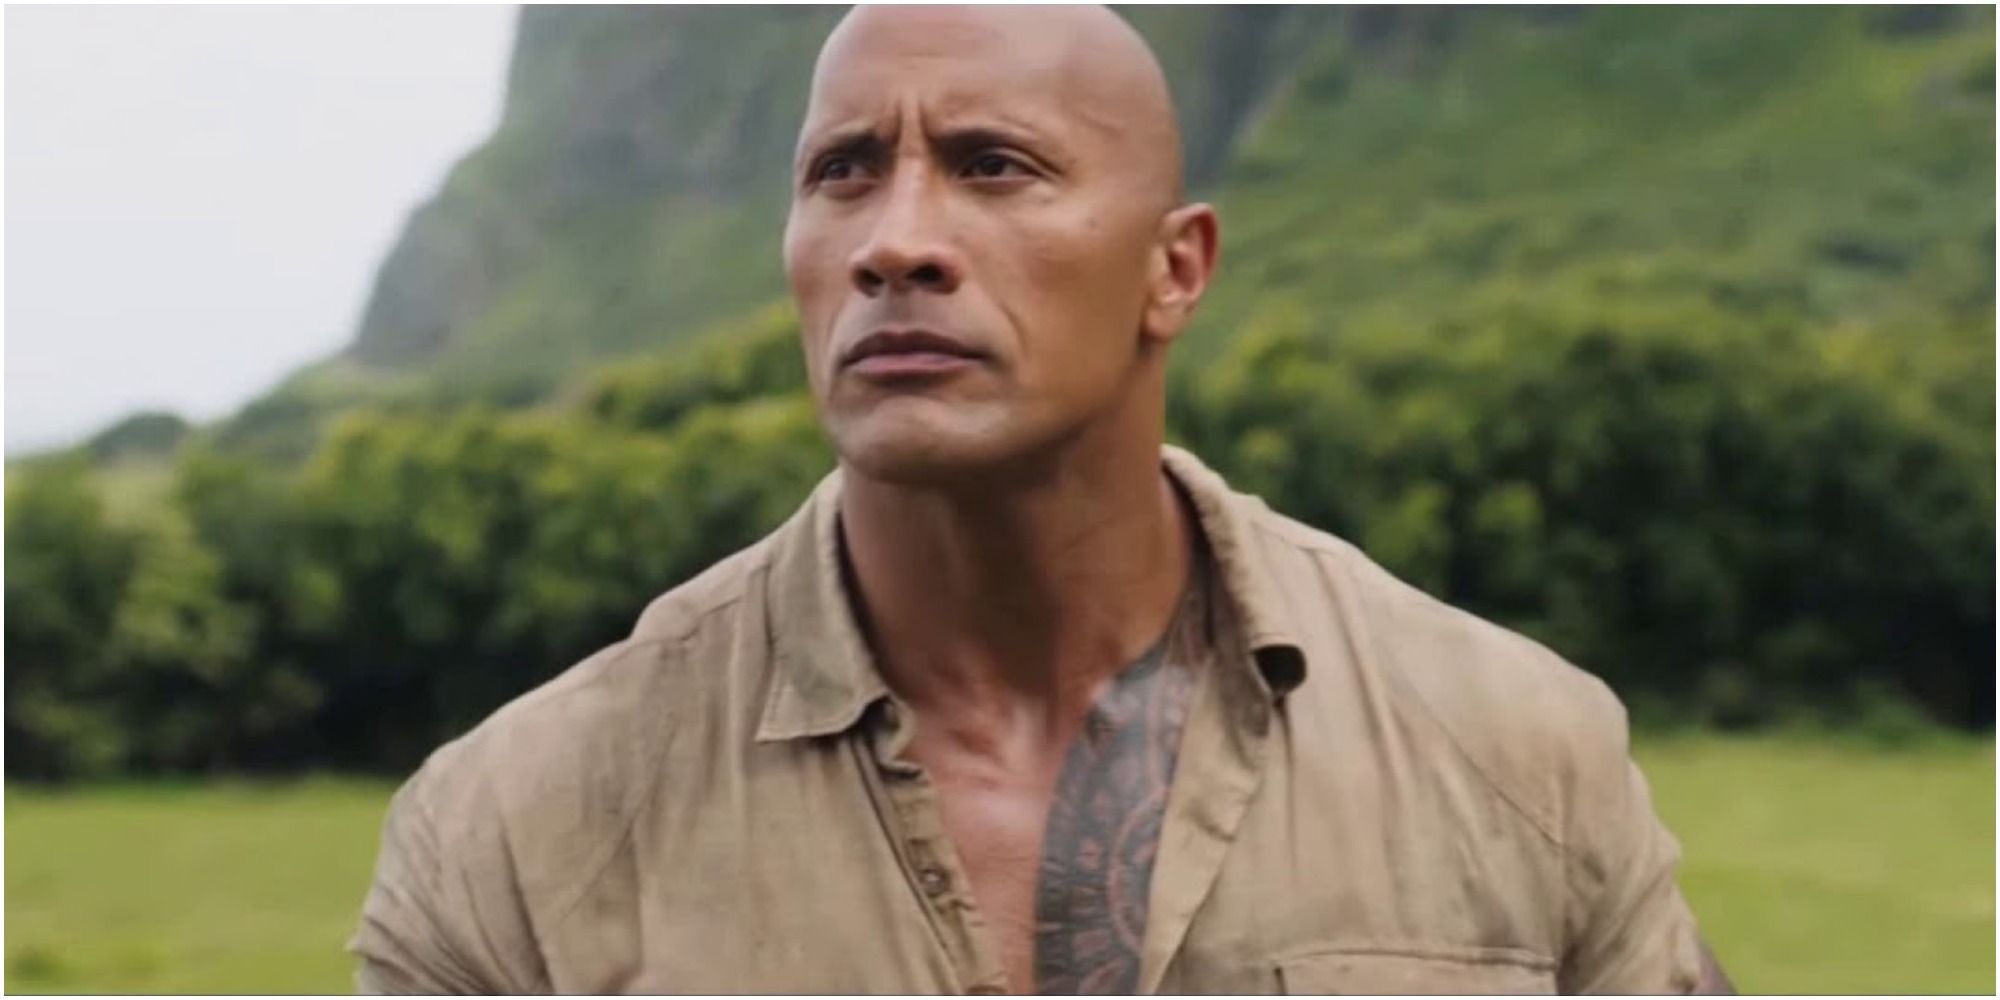 A screenshot of Dwayne Johnson's Smolder Bravestone with his smoldering intensity in Jumanji: Welcome to the Jungle